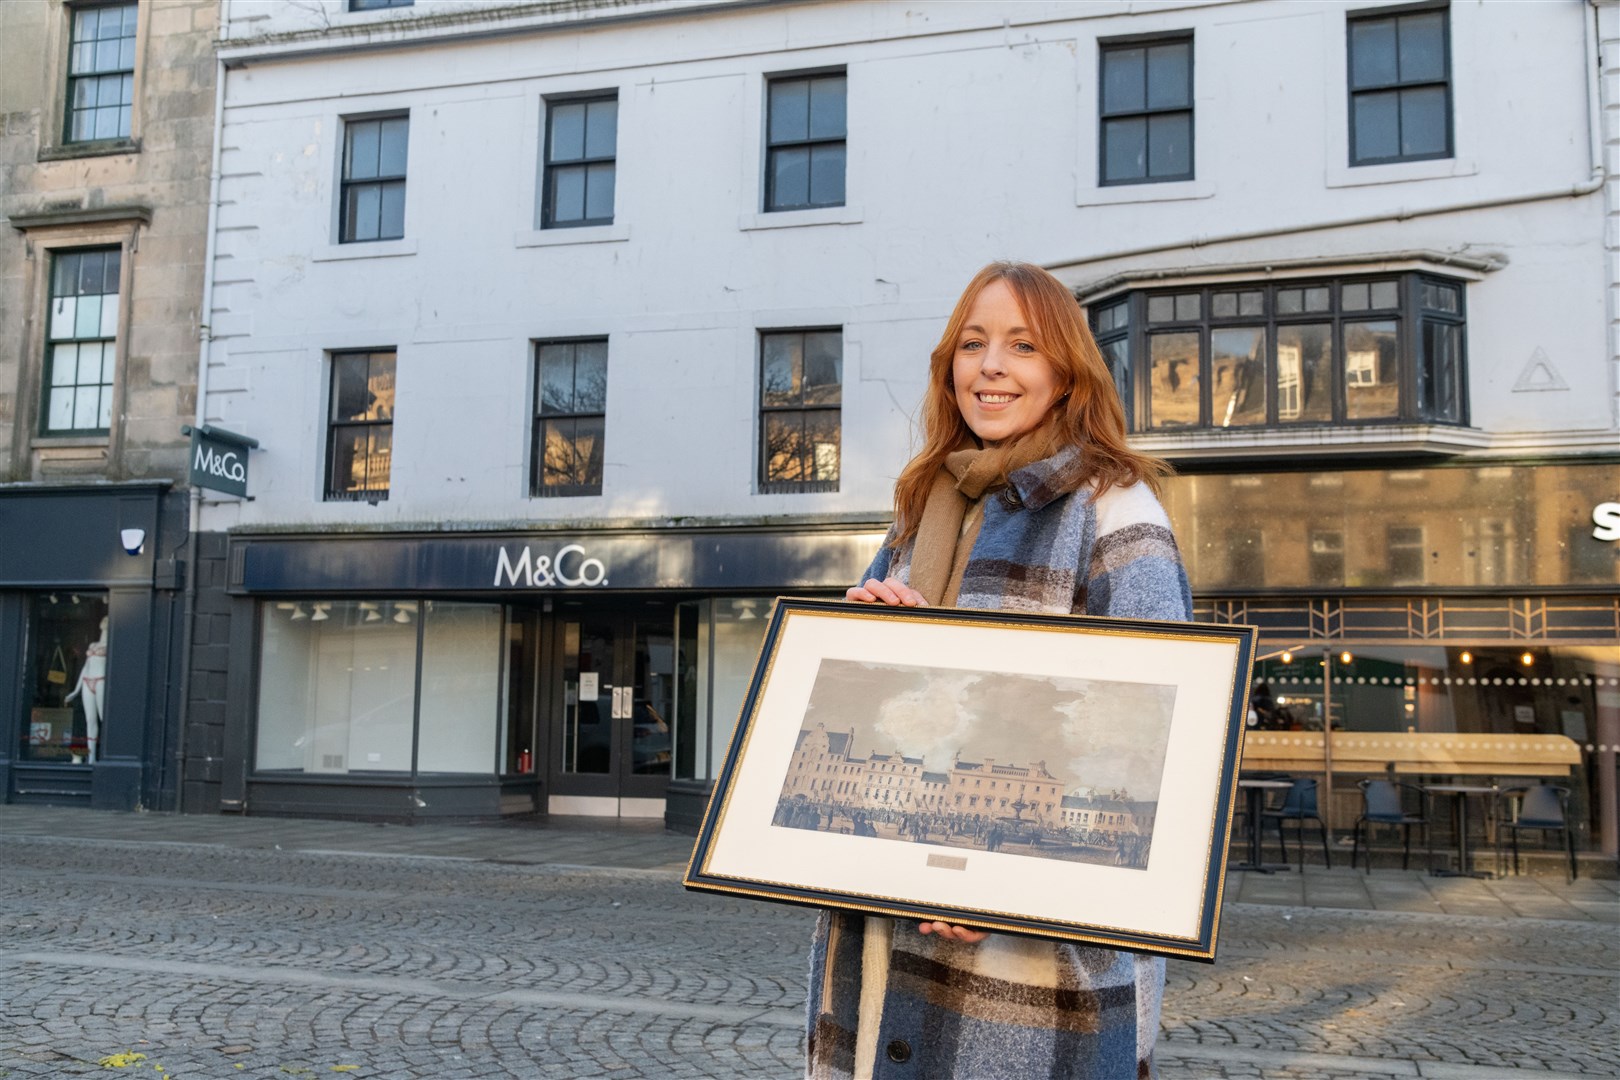 Stacey Toner from Moray Arts Development Engagement (M:ADE) who is spearheading a project to transform the former Gordon Arms Hotel building into a public gallery and workspace in Elgin High Street.Picture: Beth Taylor